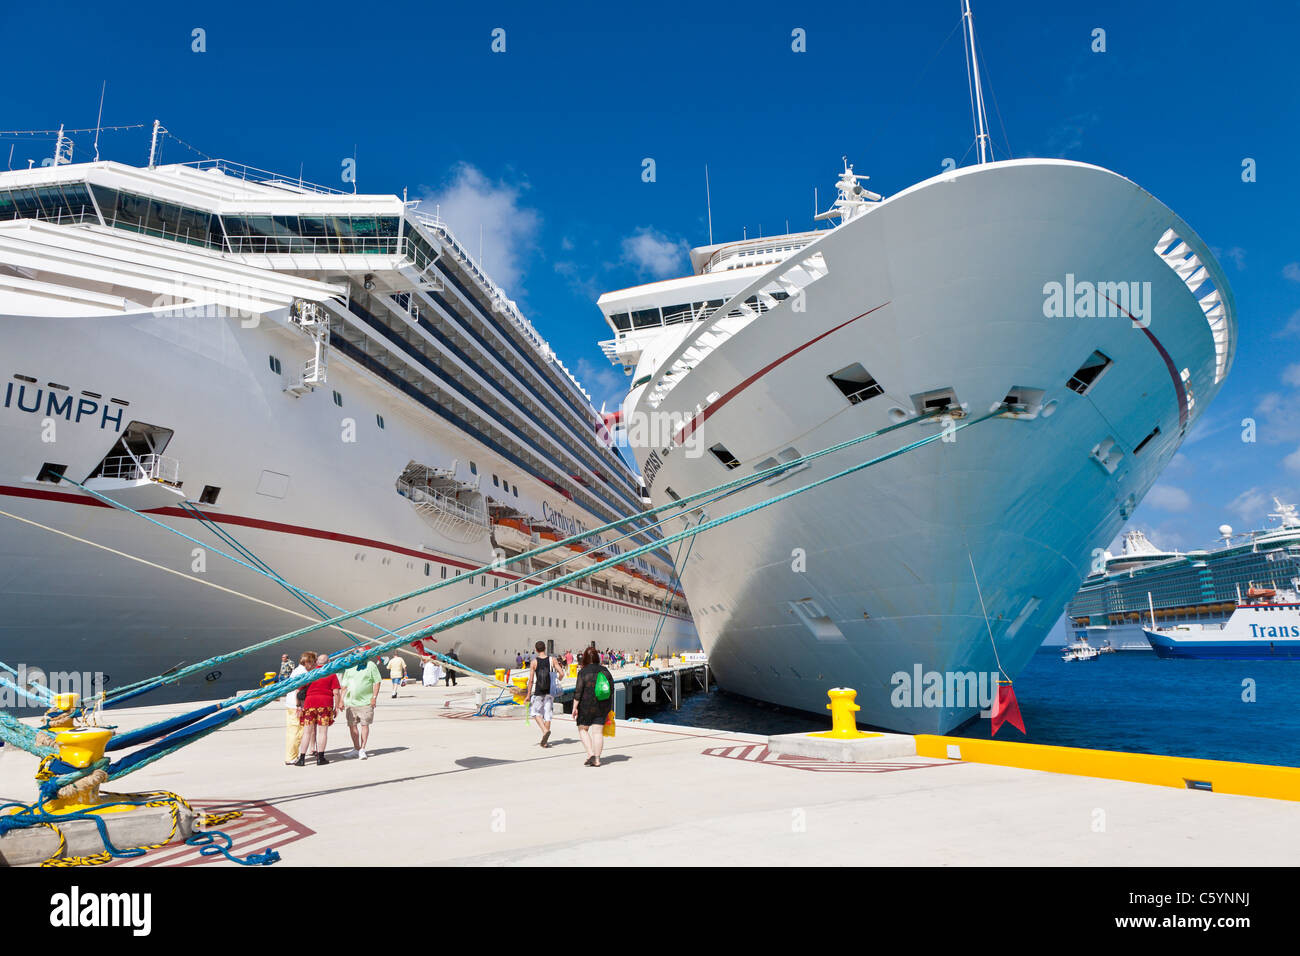 Cruise ship passengers on pier near Carnival cruise ships Triumph and Ecstasy in Cozumel, Mexico in the Caribbean Sea Stock Photo